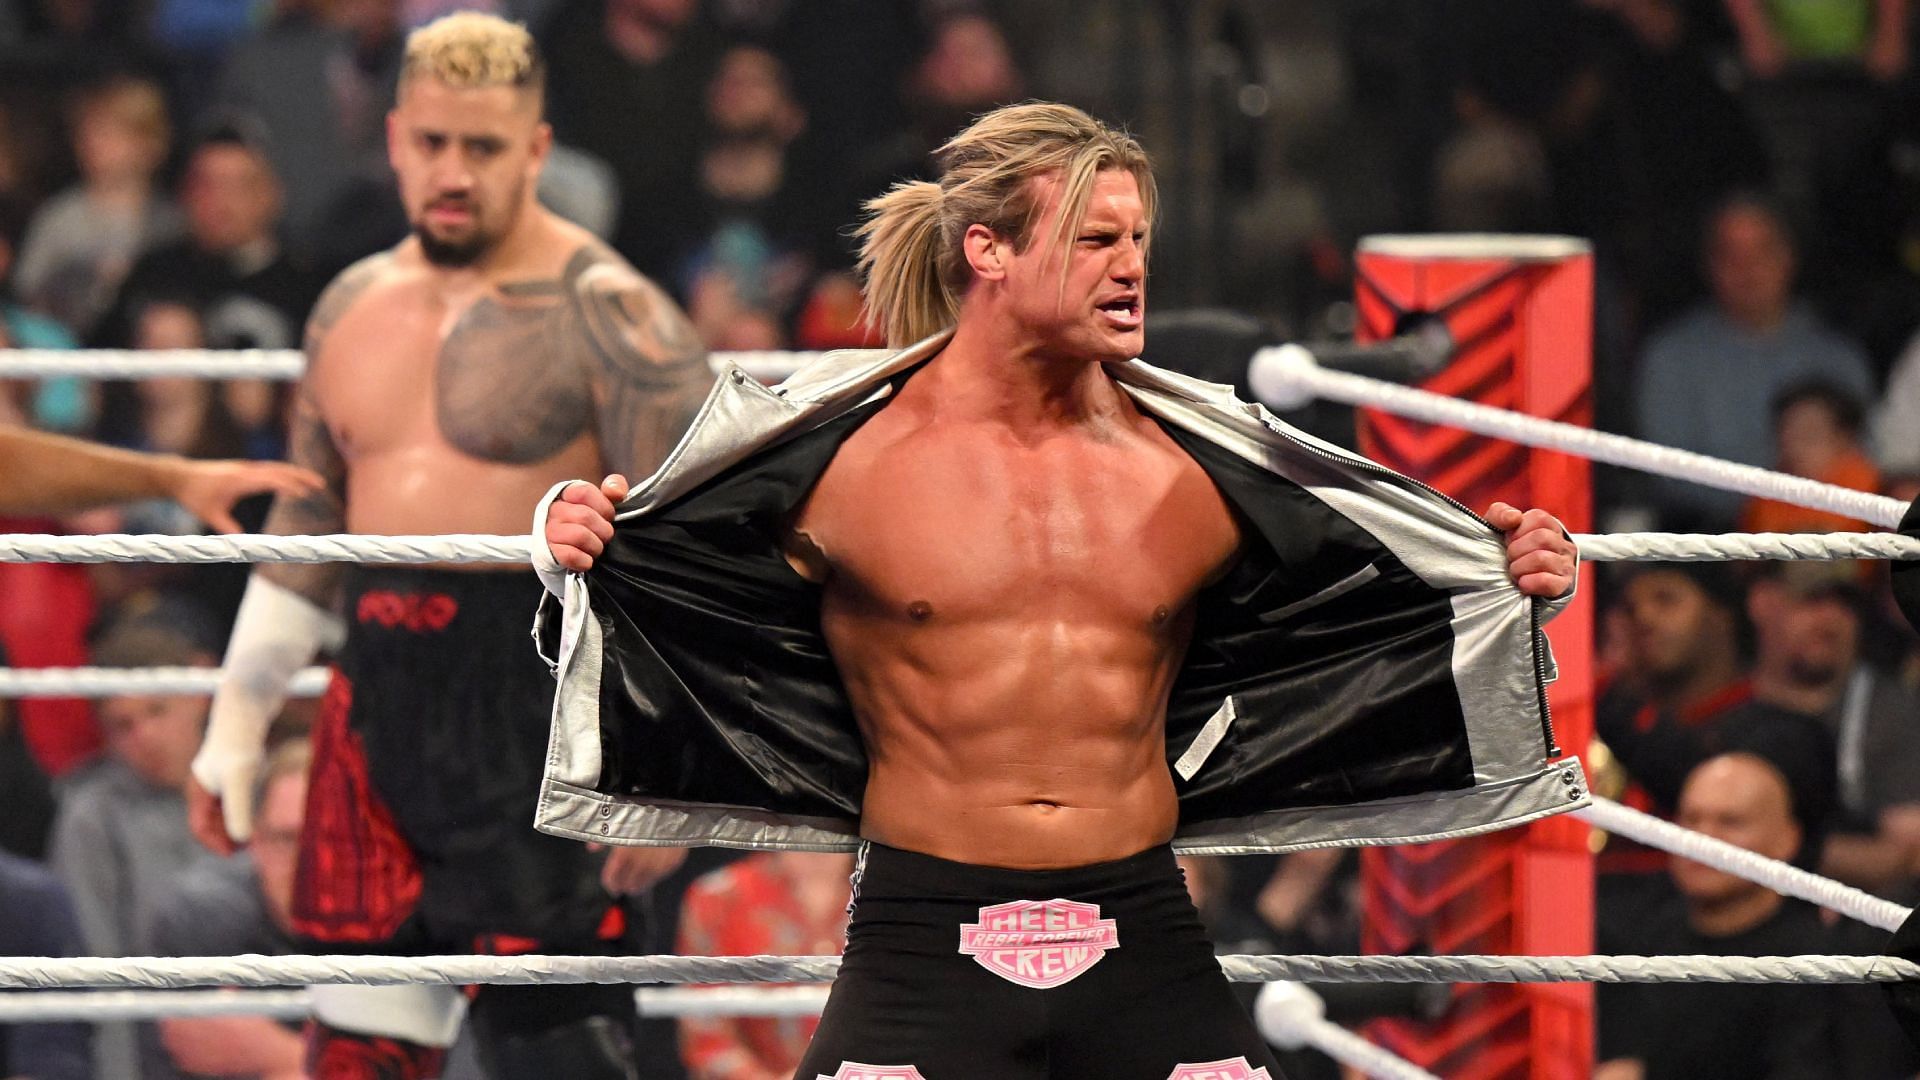 Dolph Ziggler and Solo Sikoa